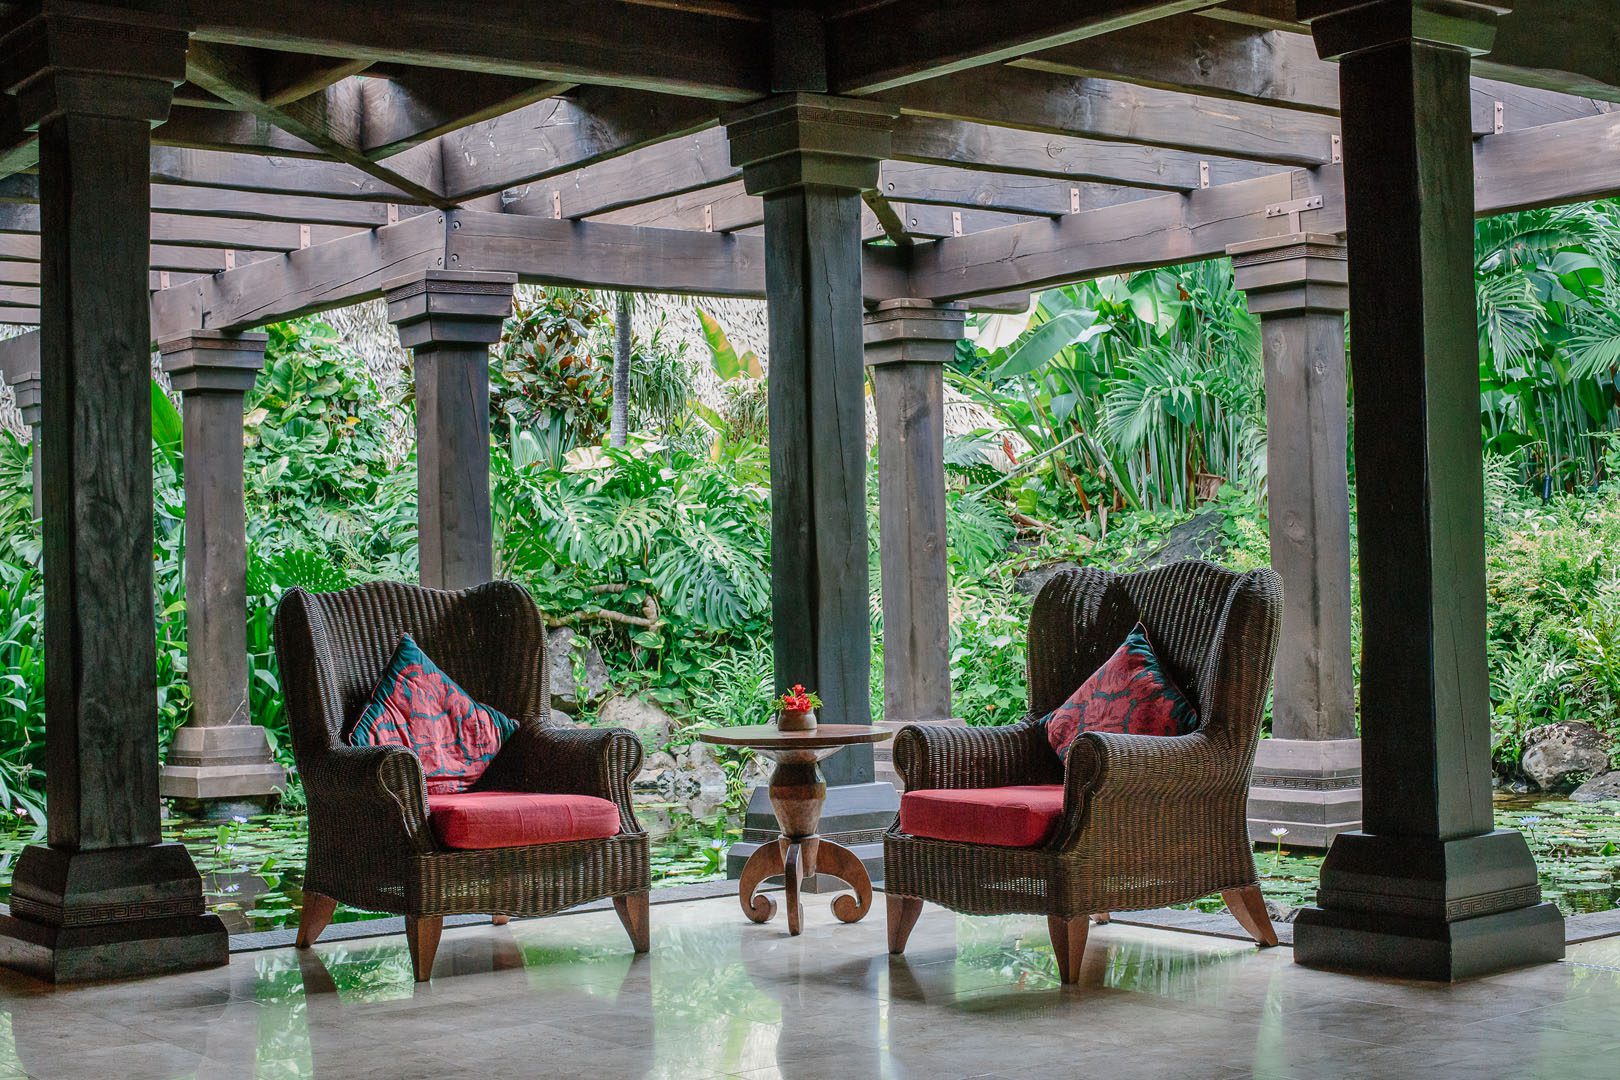 Image of the reception waiting area that features a beautiful background of water lily pond